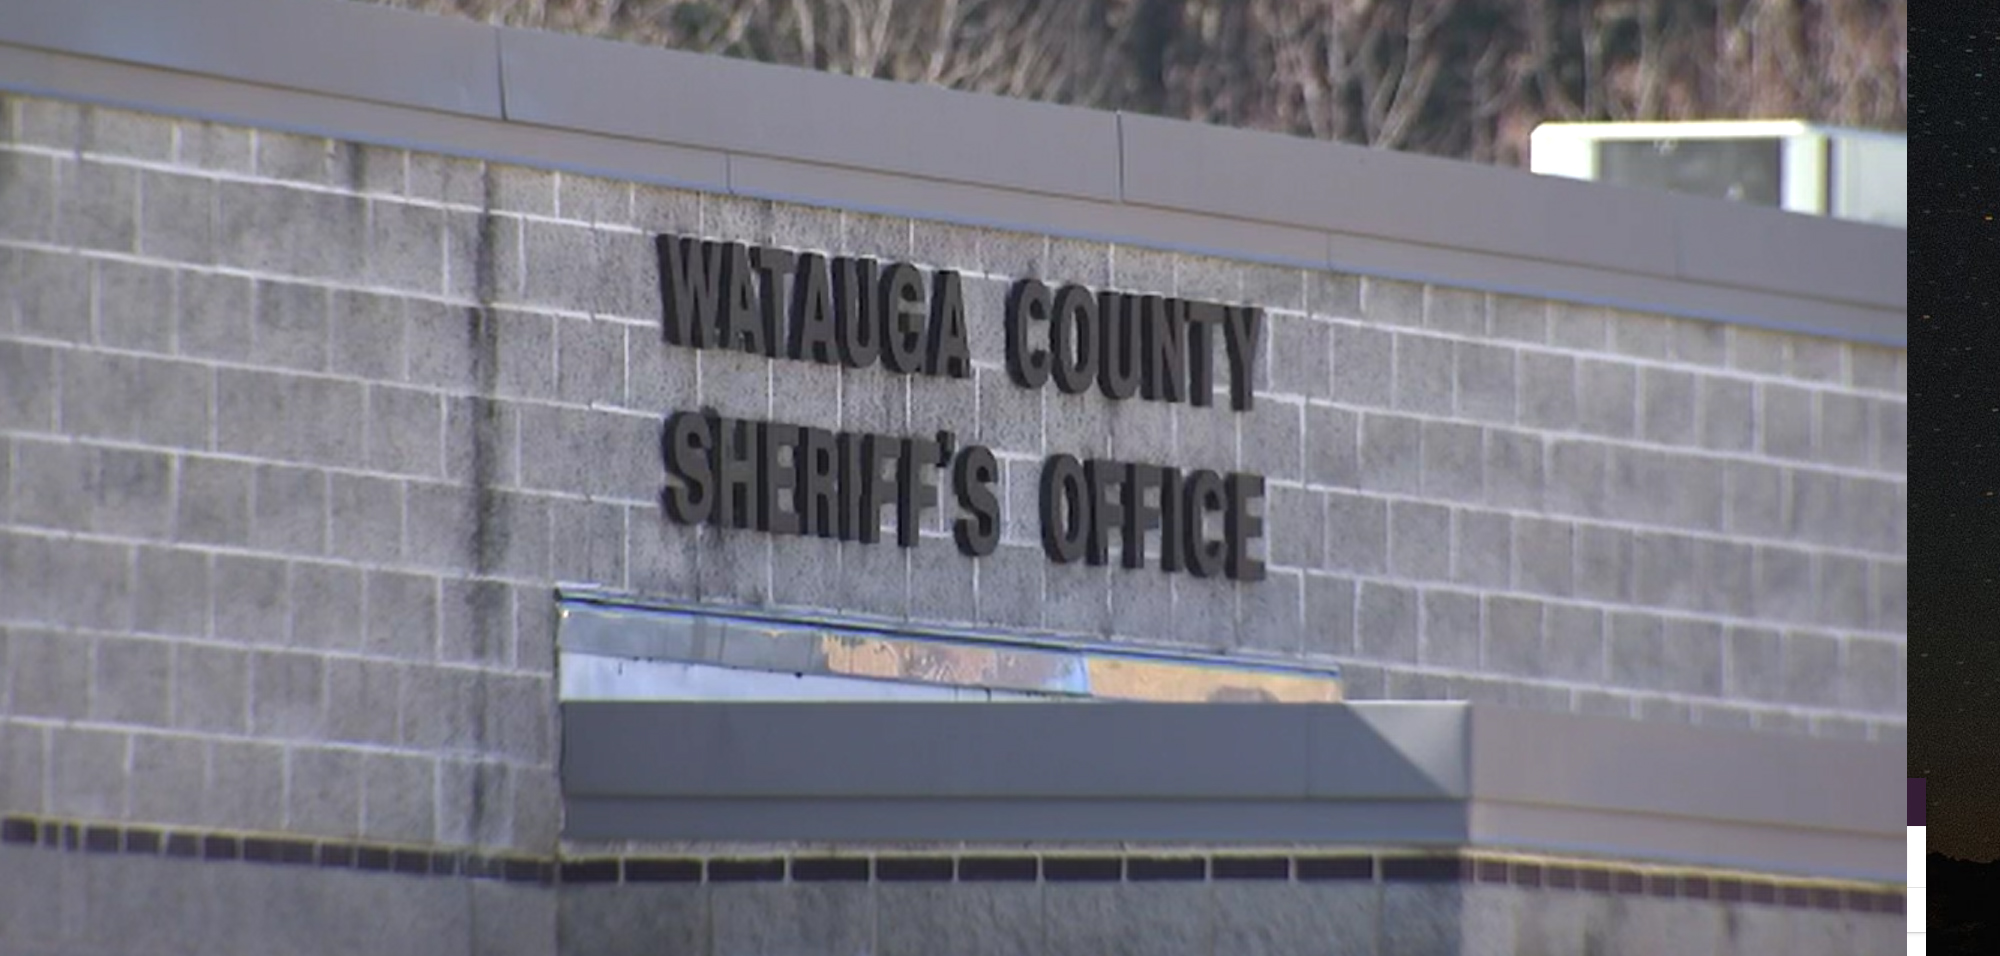 PHOTO: In the screen grab from video, the Watauga County Sheriff's Office is shown.